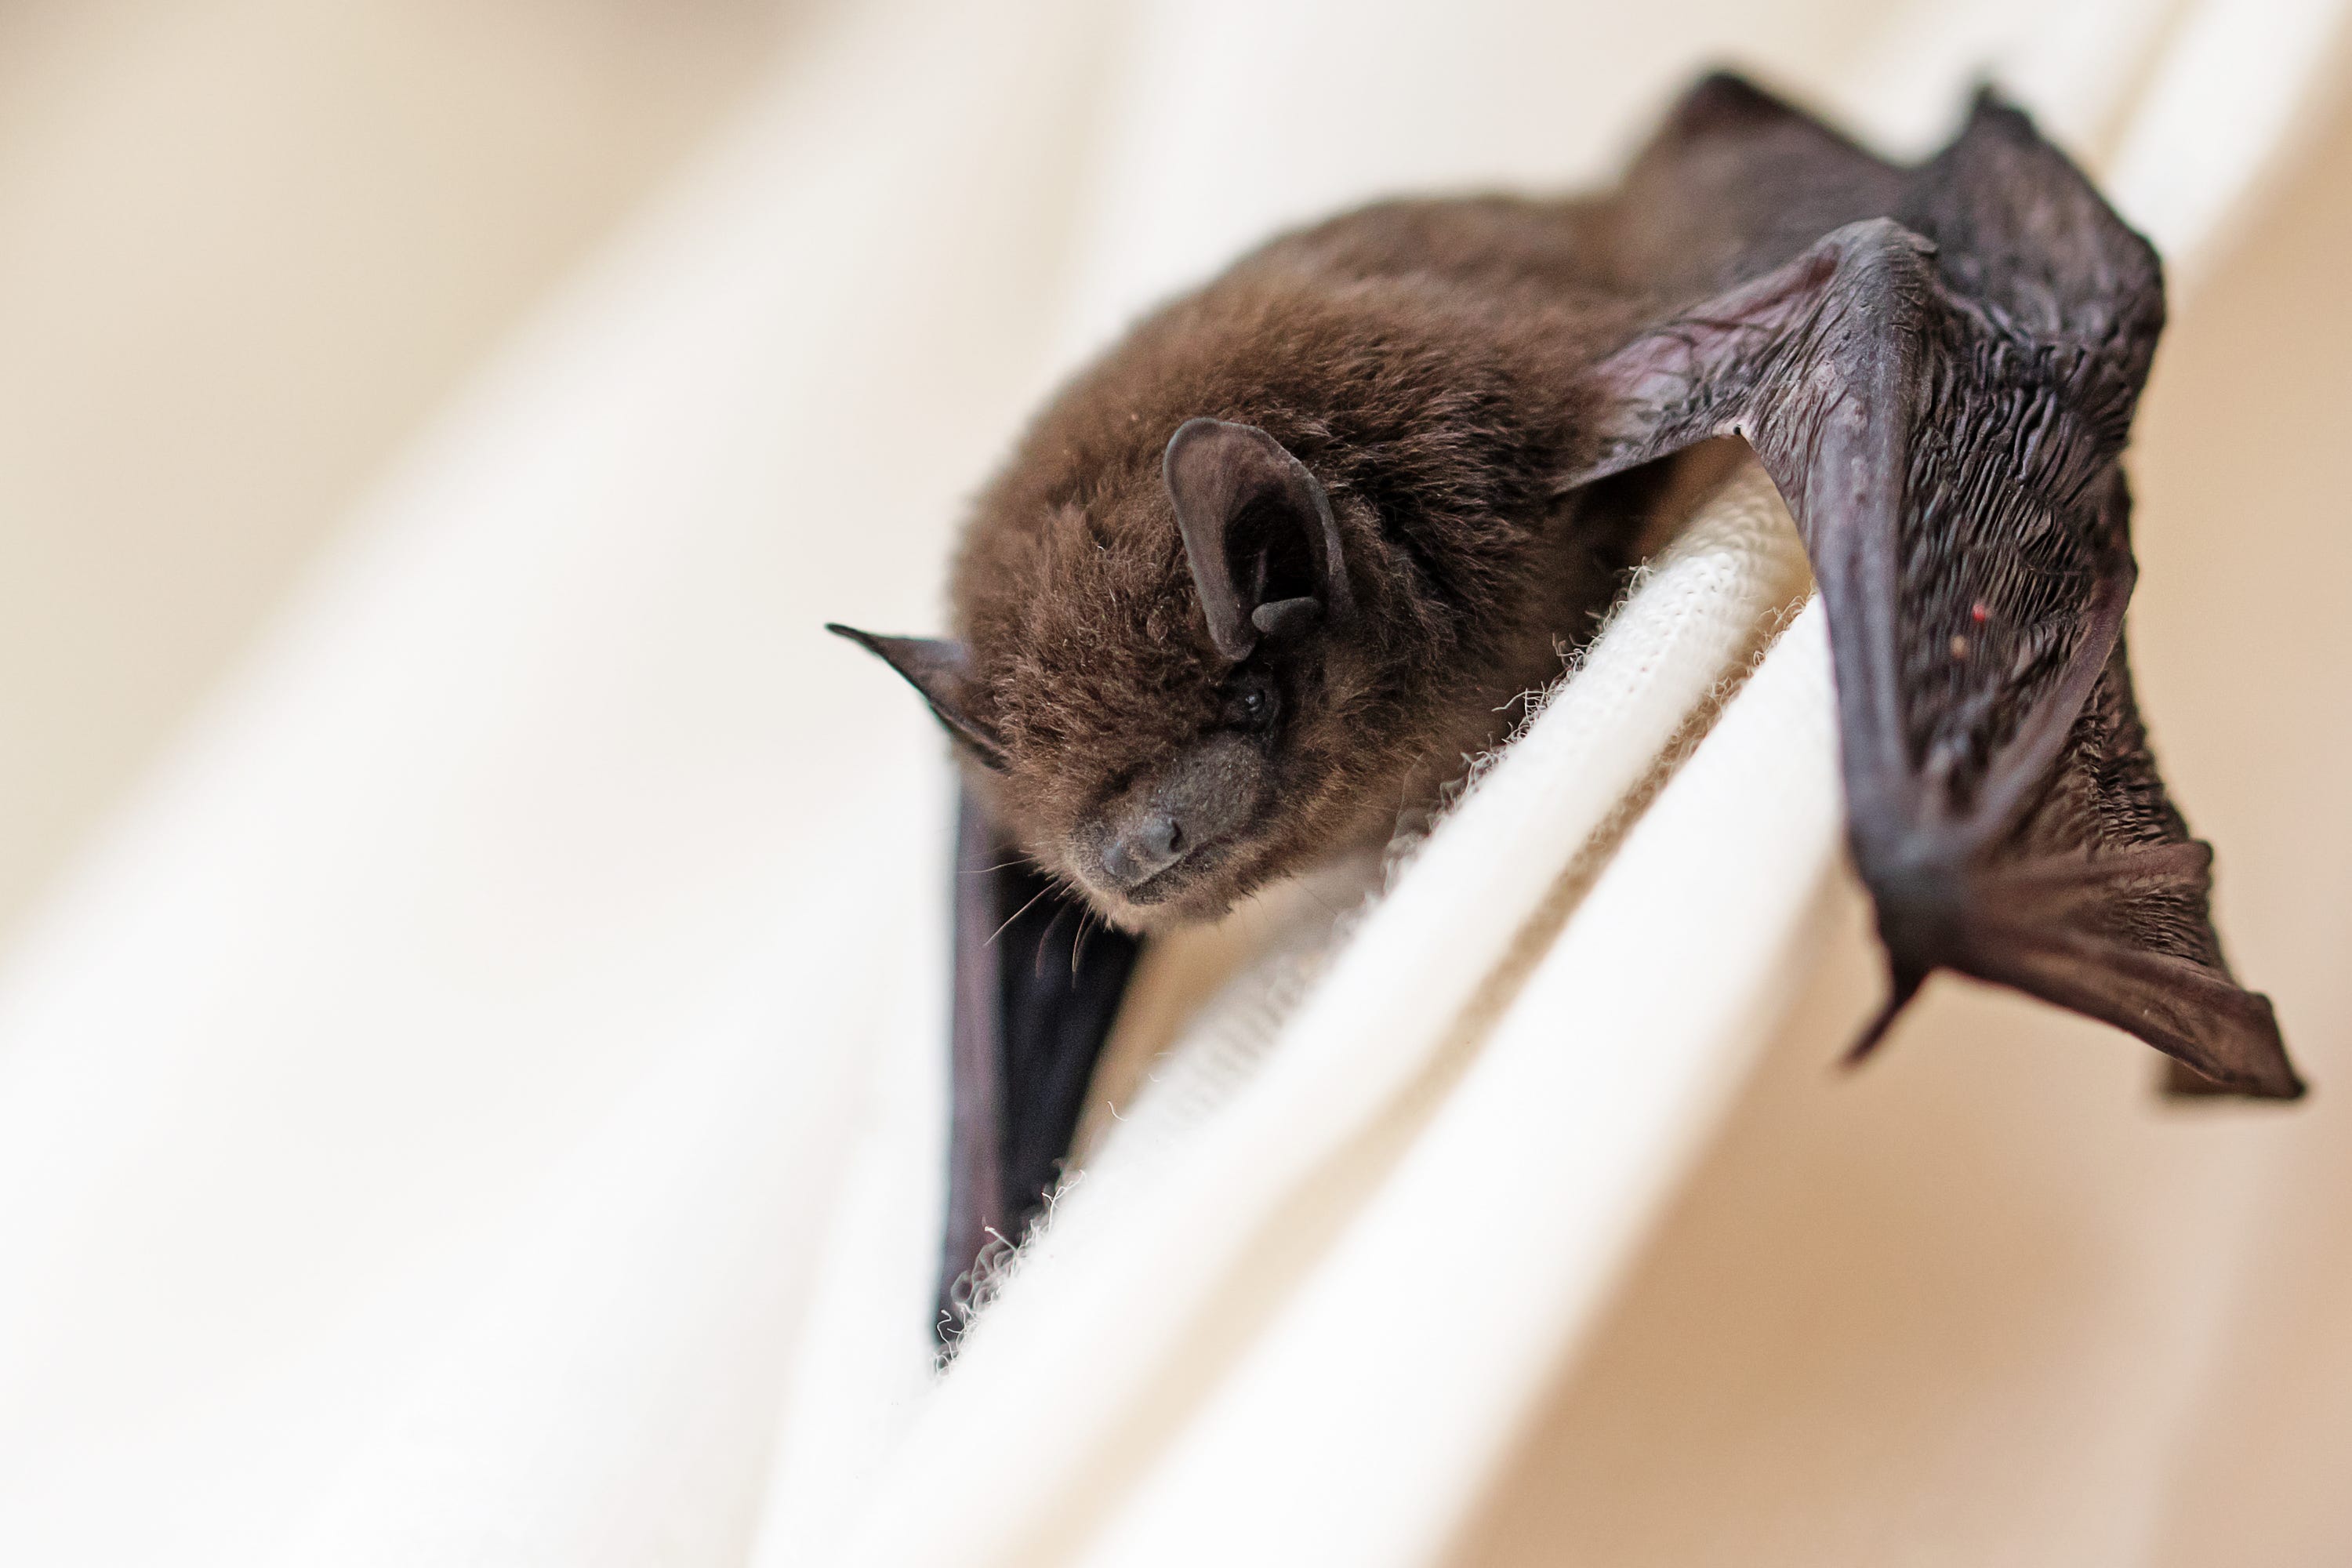 What happens if a bat doesn't catch her baby?